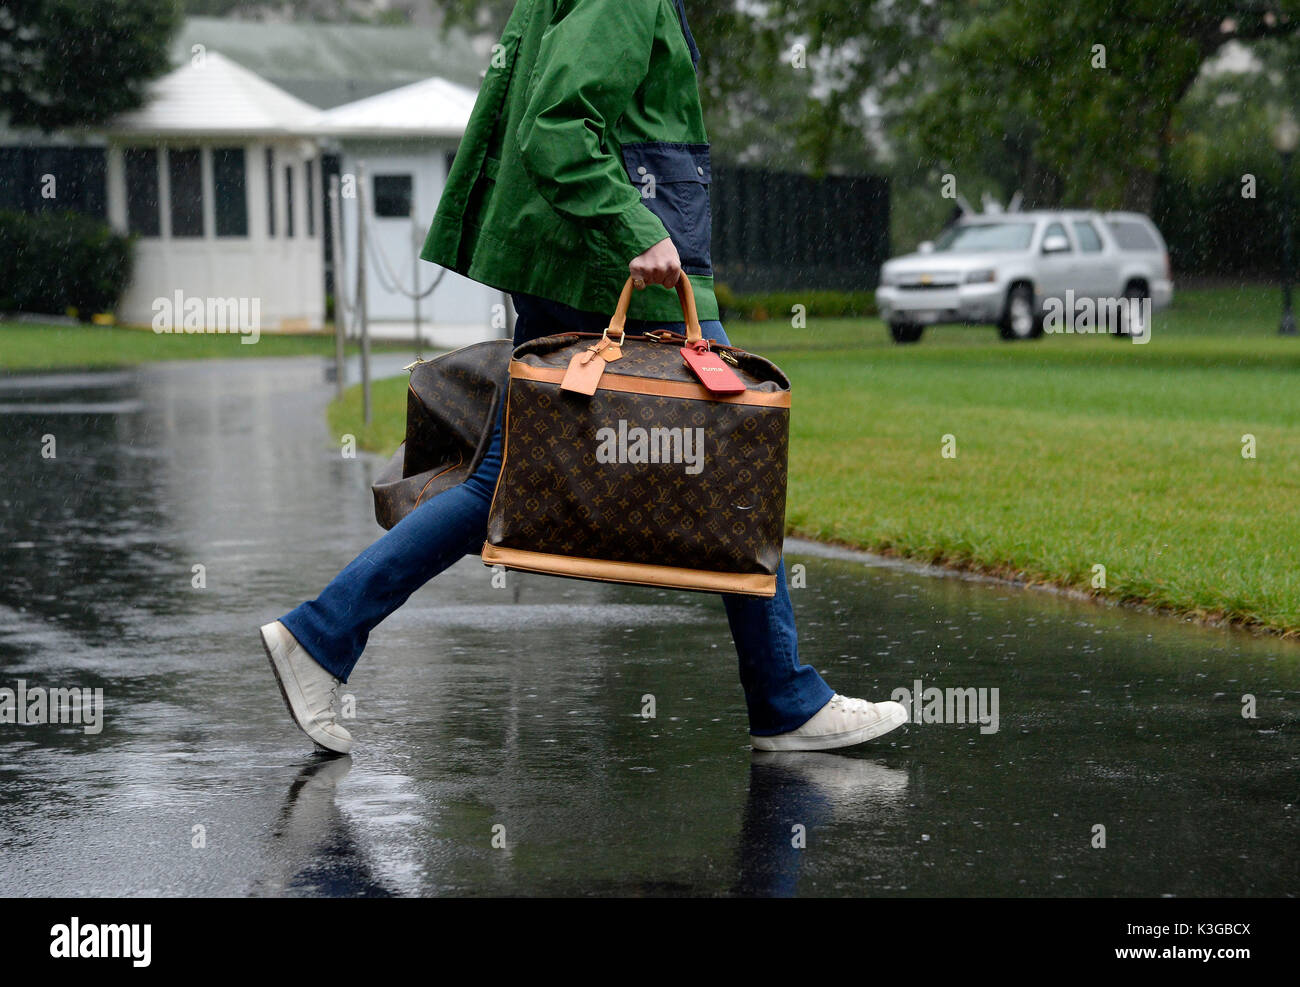 A Louis Vuitton box. editorial stock image. Image of sale - 140895844